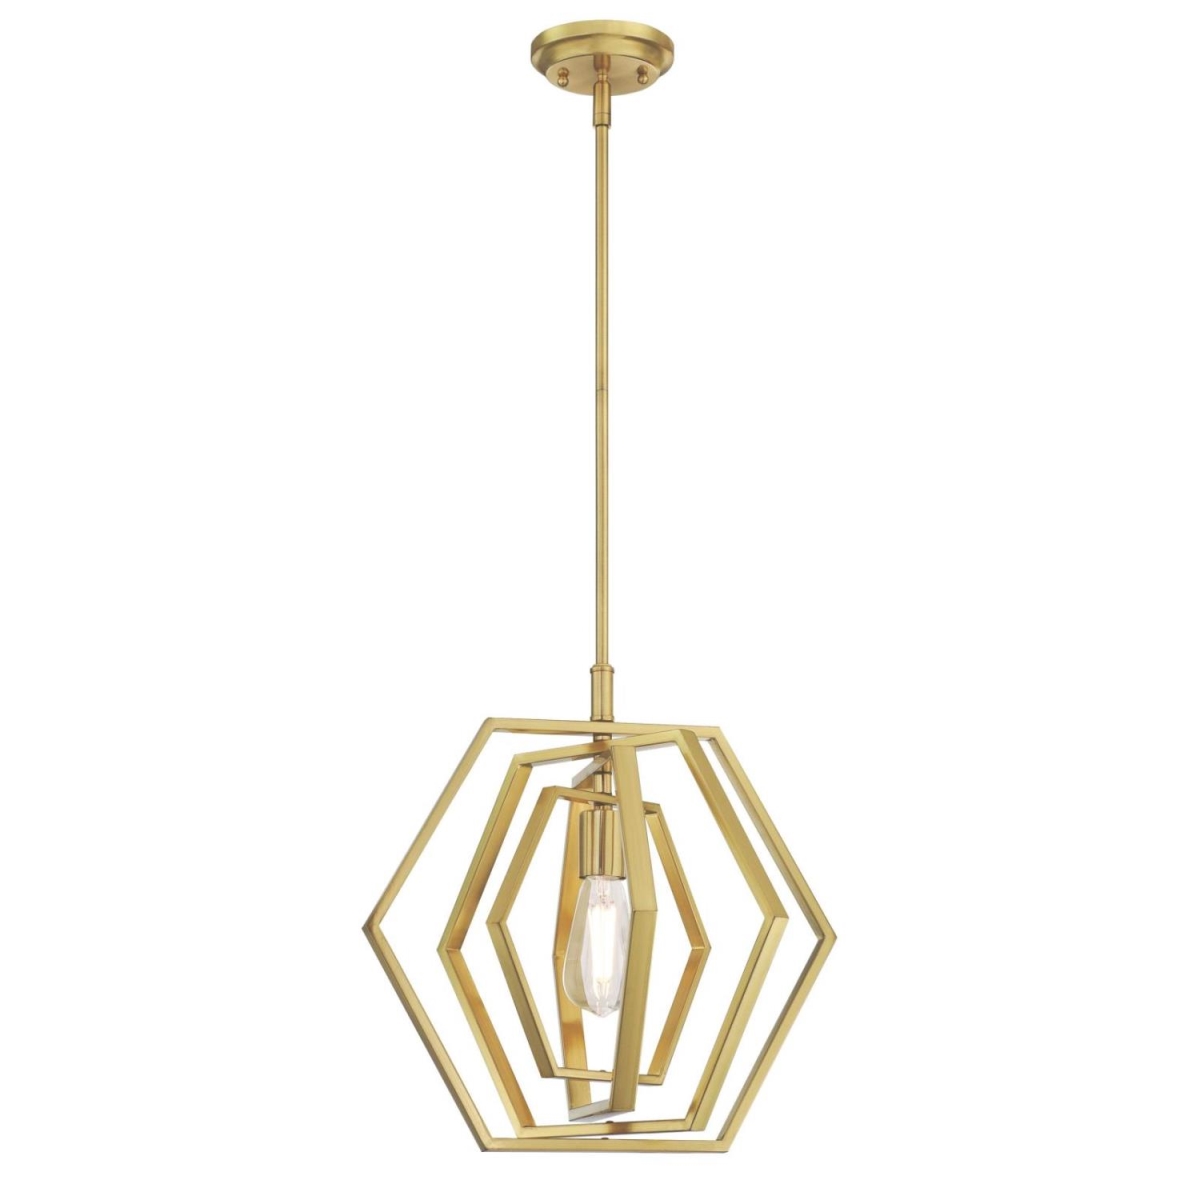 Picture of Westinghouse Lighting 6369700 Pendant Light - Champagne Brass